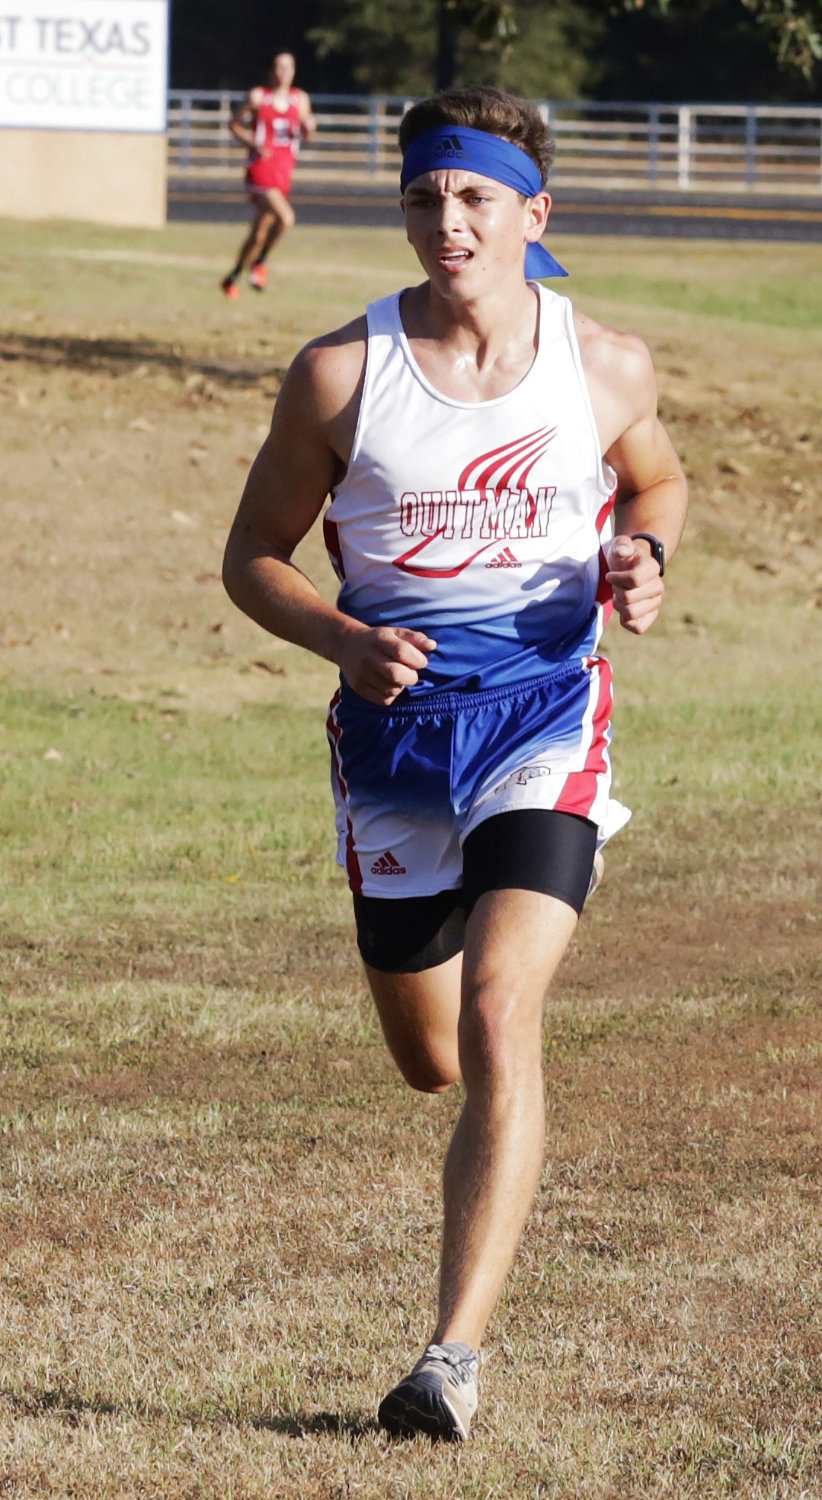 Quitman’s Brandon Jimenez was the fastest Bulldog on the day. He finished third with a time of 18:36 and led the Bulldogs to a title.